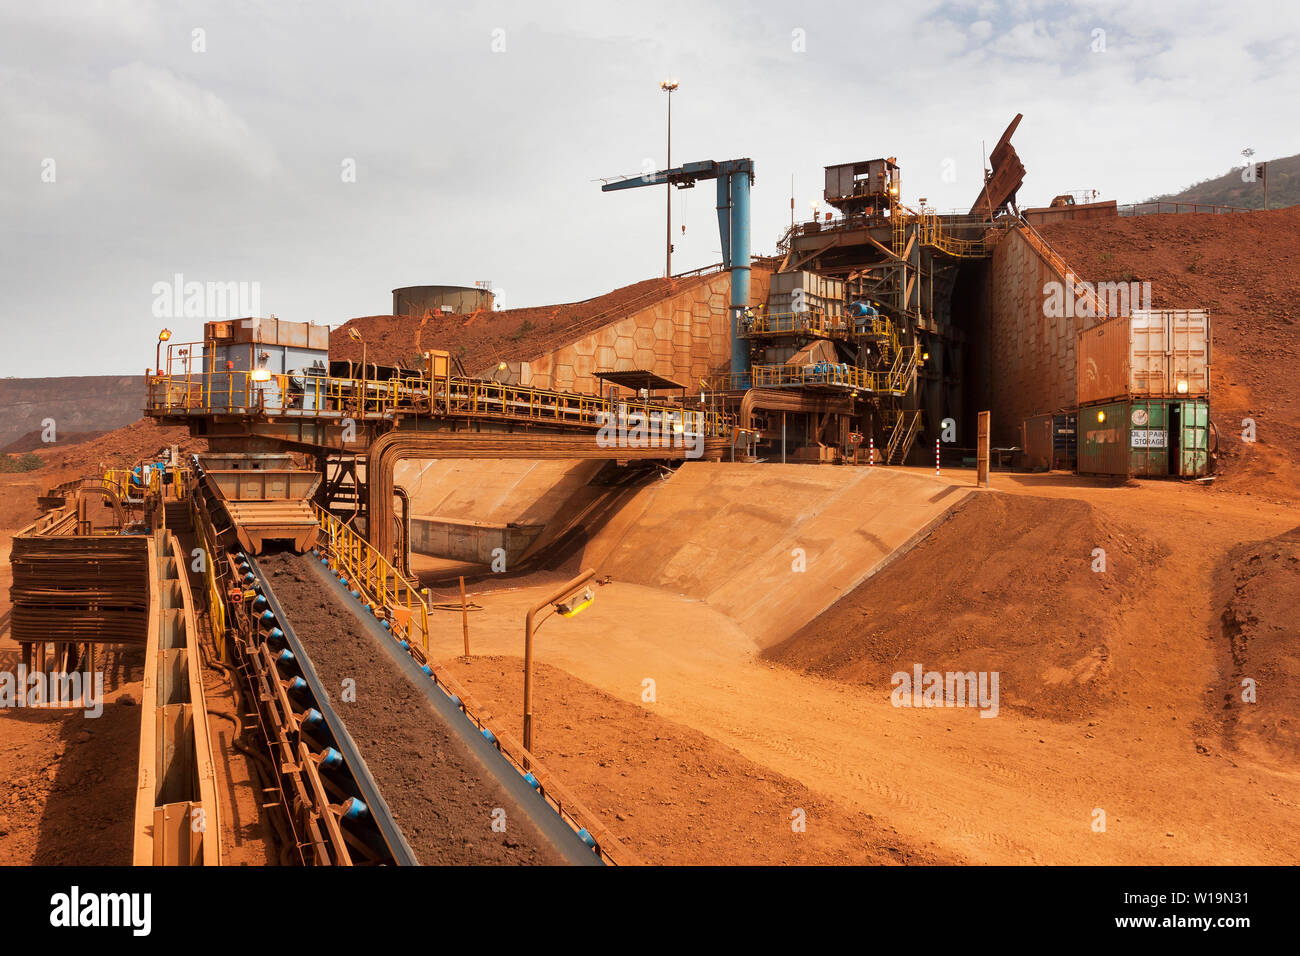 Mining operations for transporting & managing iron ore. Primary crusher with lump ore on conveyor belt and truck unloading product into hopper at top Stock Photo